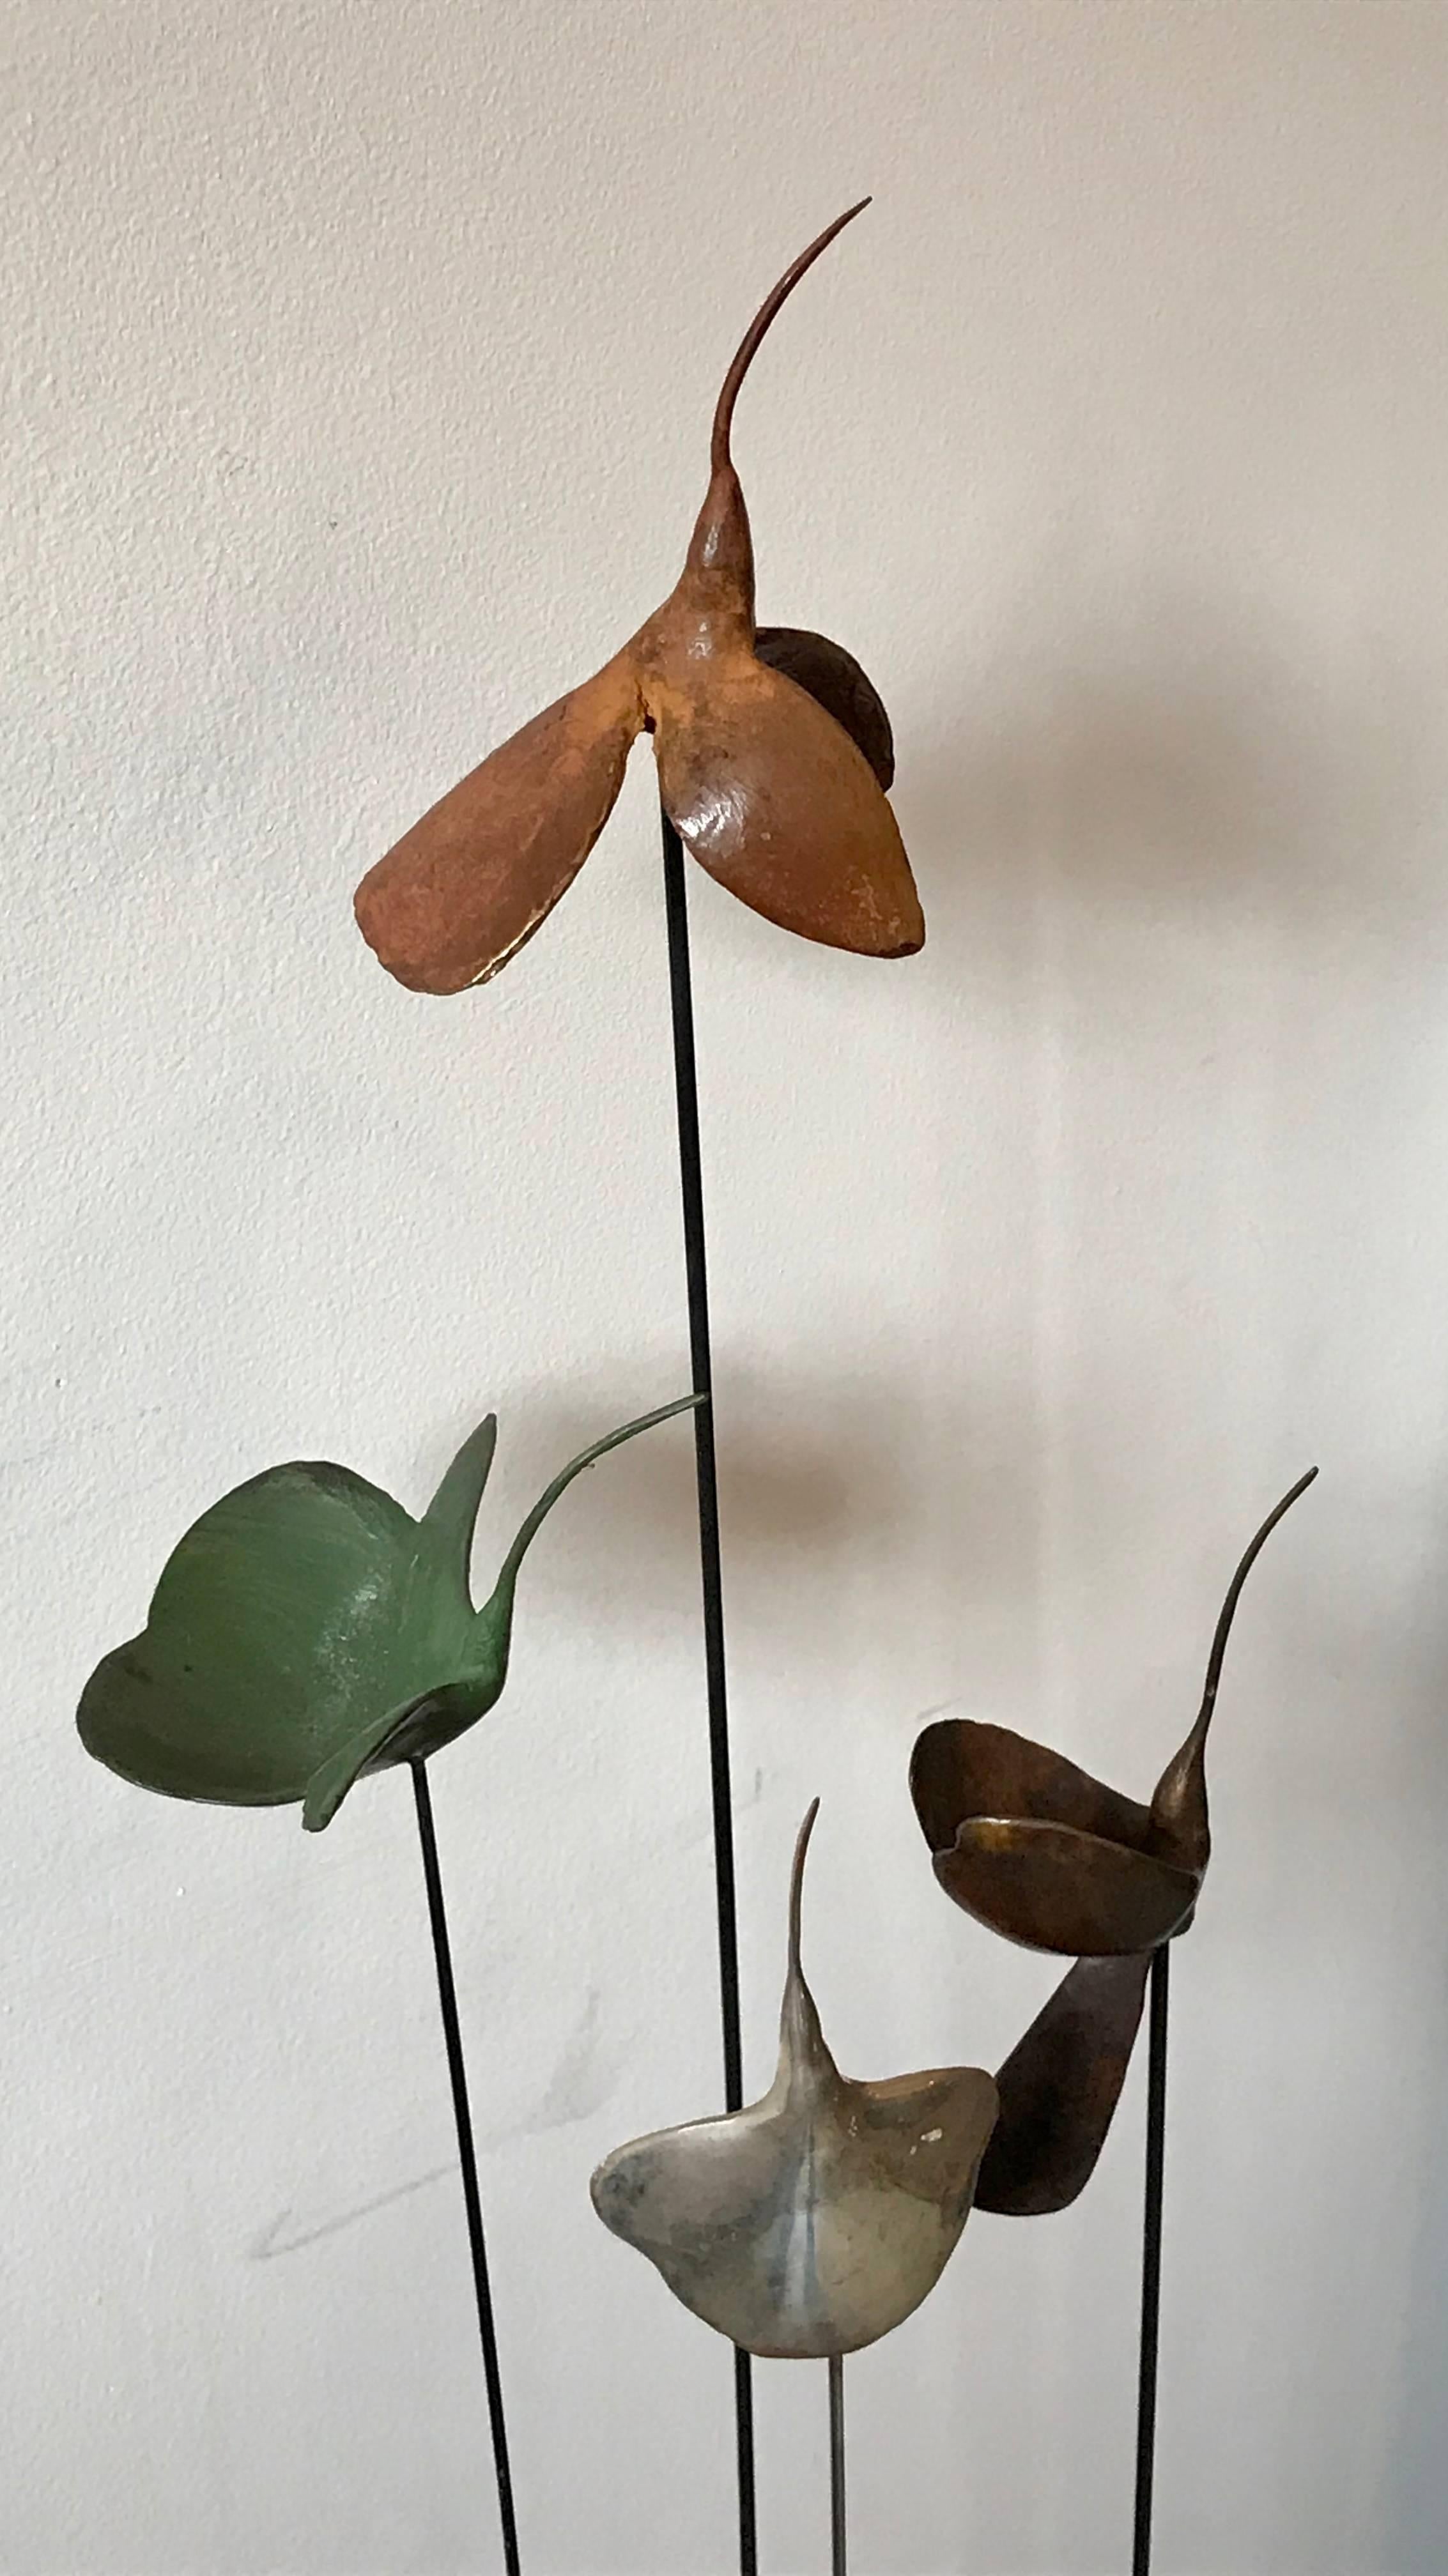 Minimalist Set of Four Suspended Hummingbird Sculptures by Sharon Wandel, Bronze and Silver